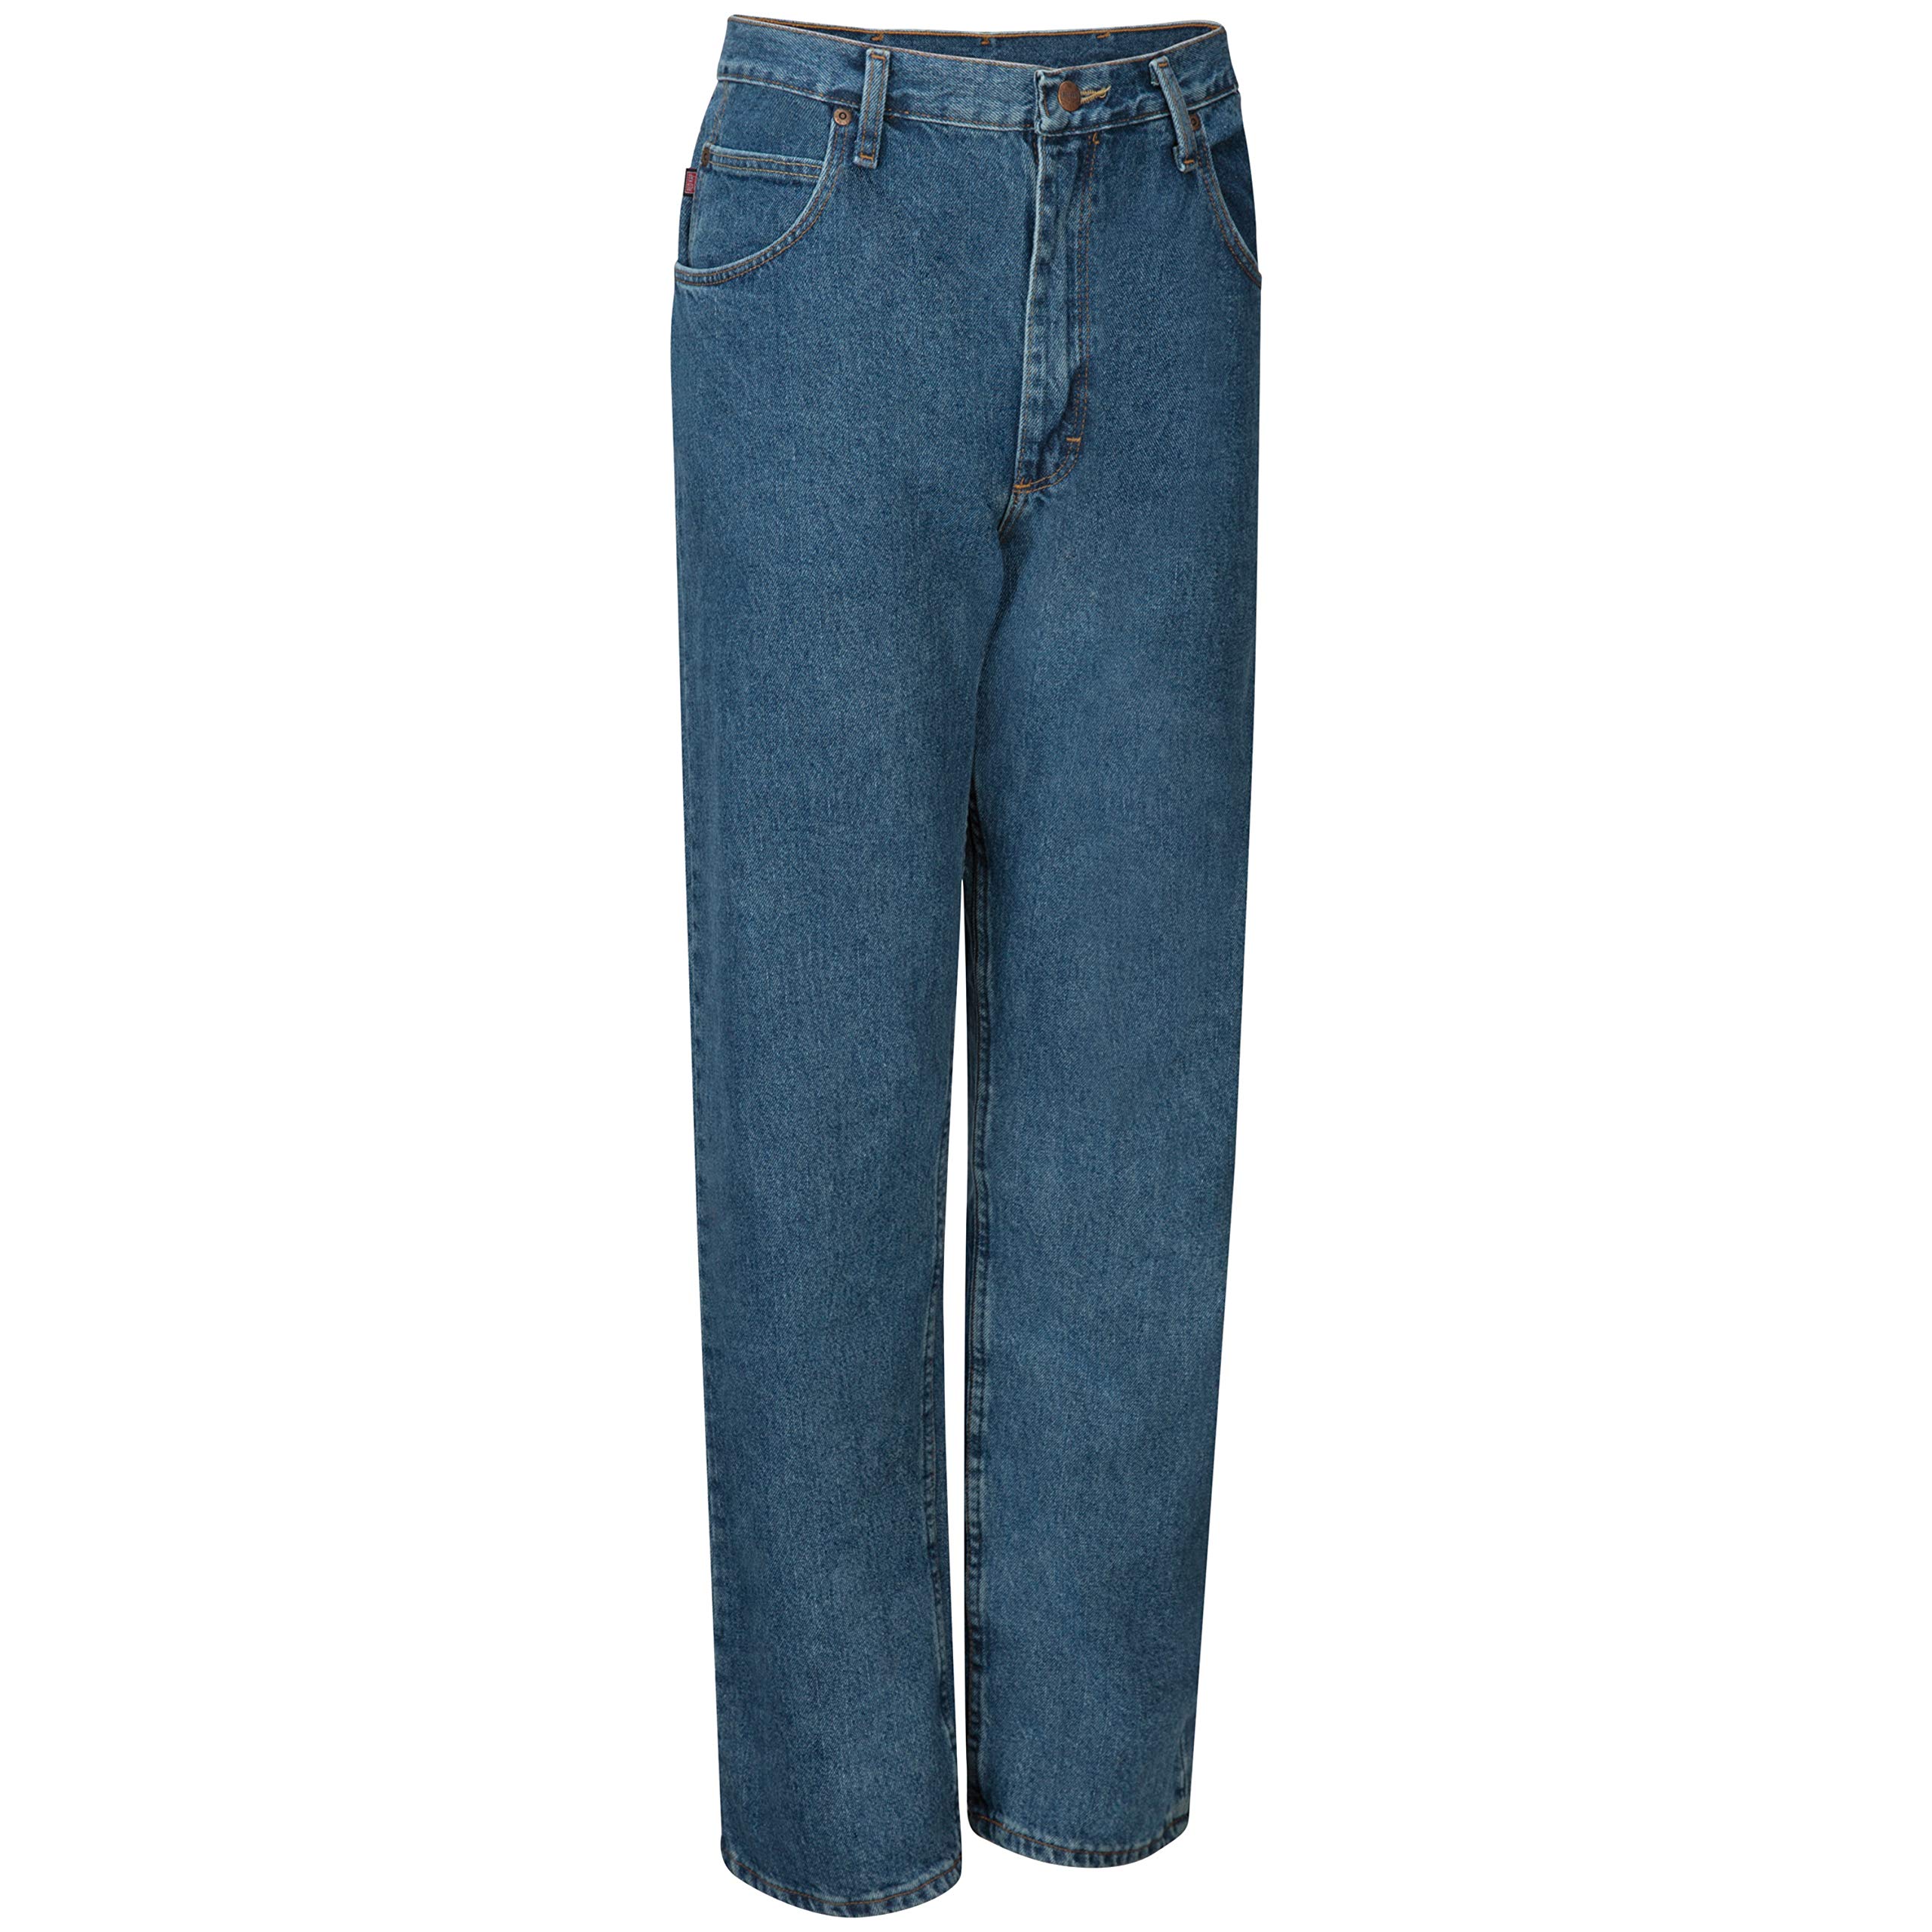 Red Kap Men's Relaxed Fit Jean